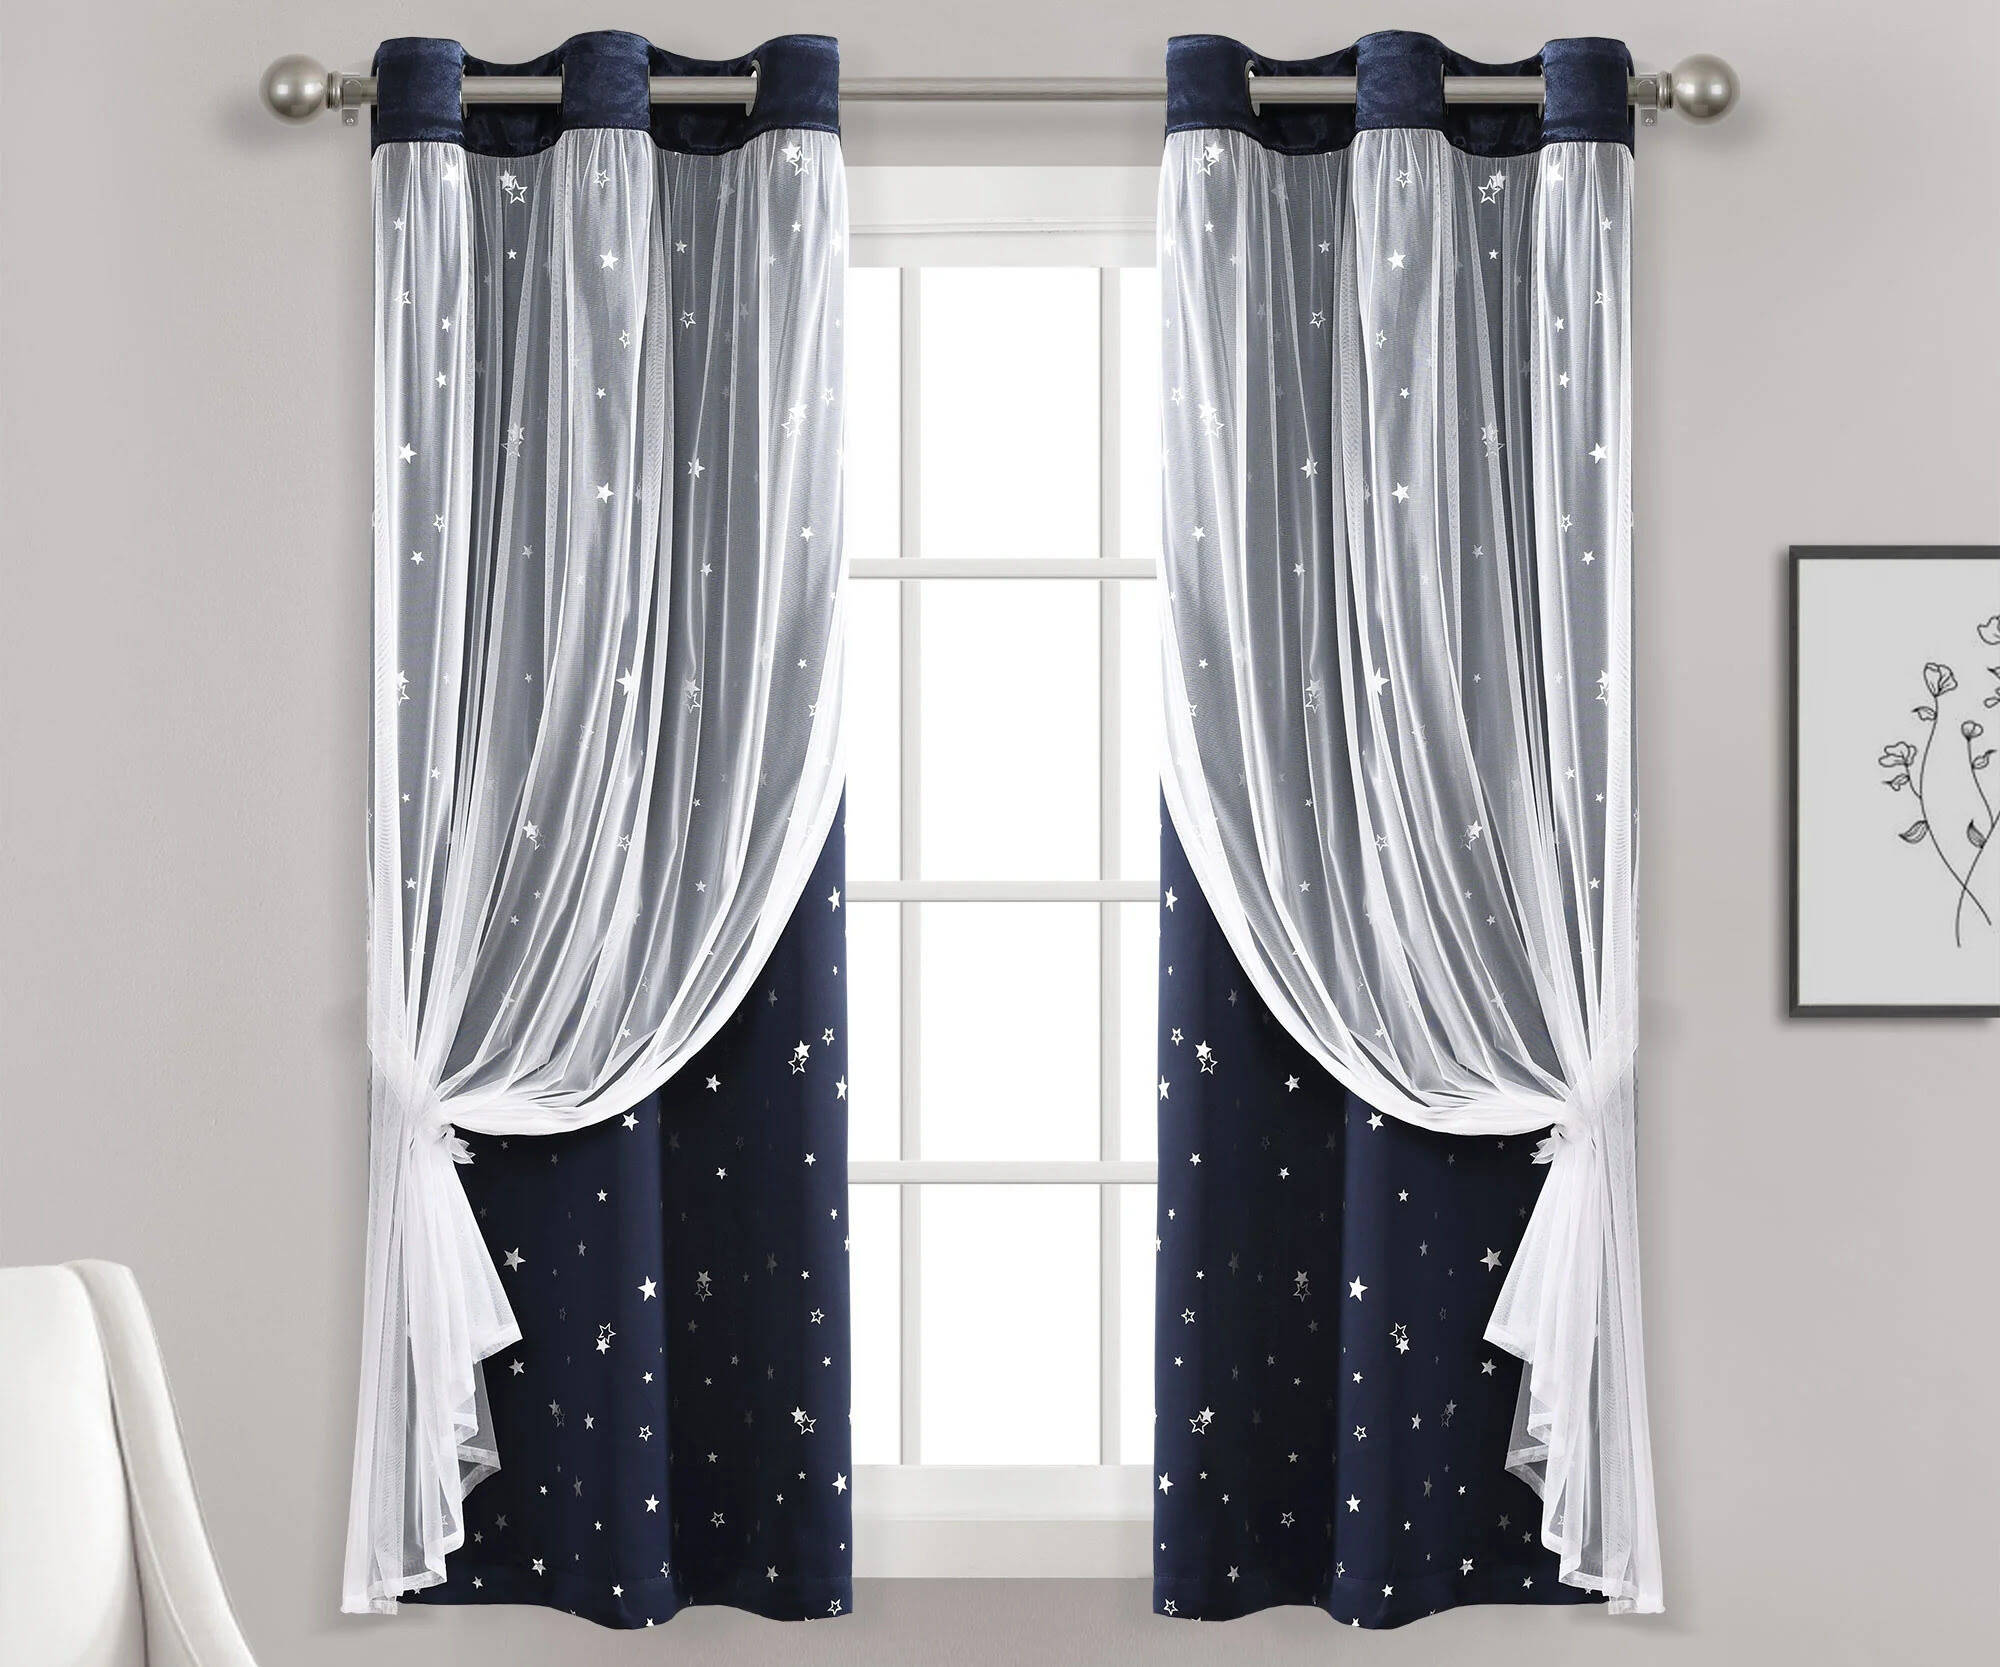 How To Make Blackout Curtains Look Nice